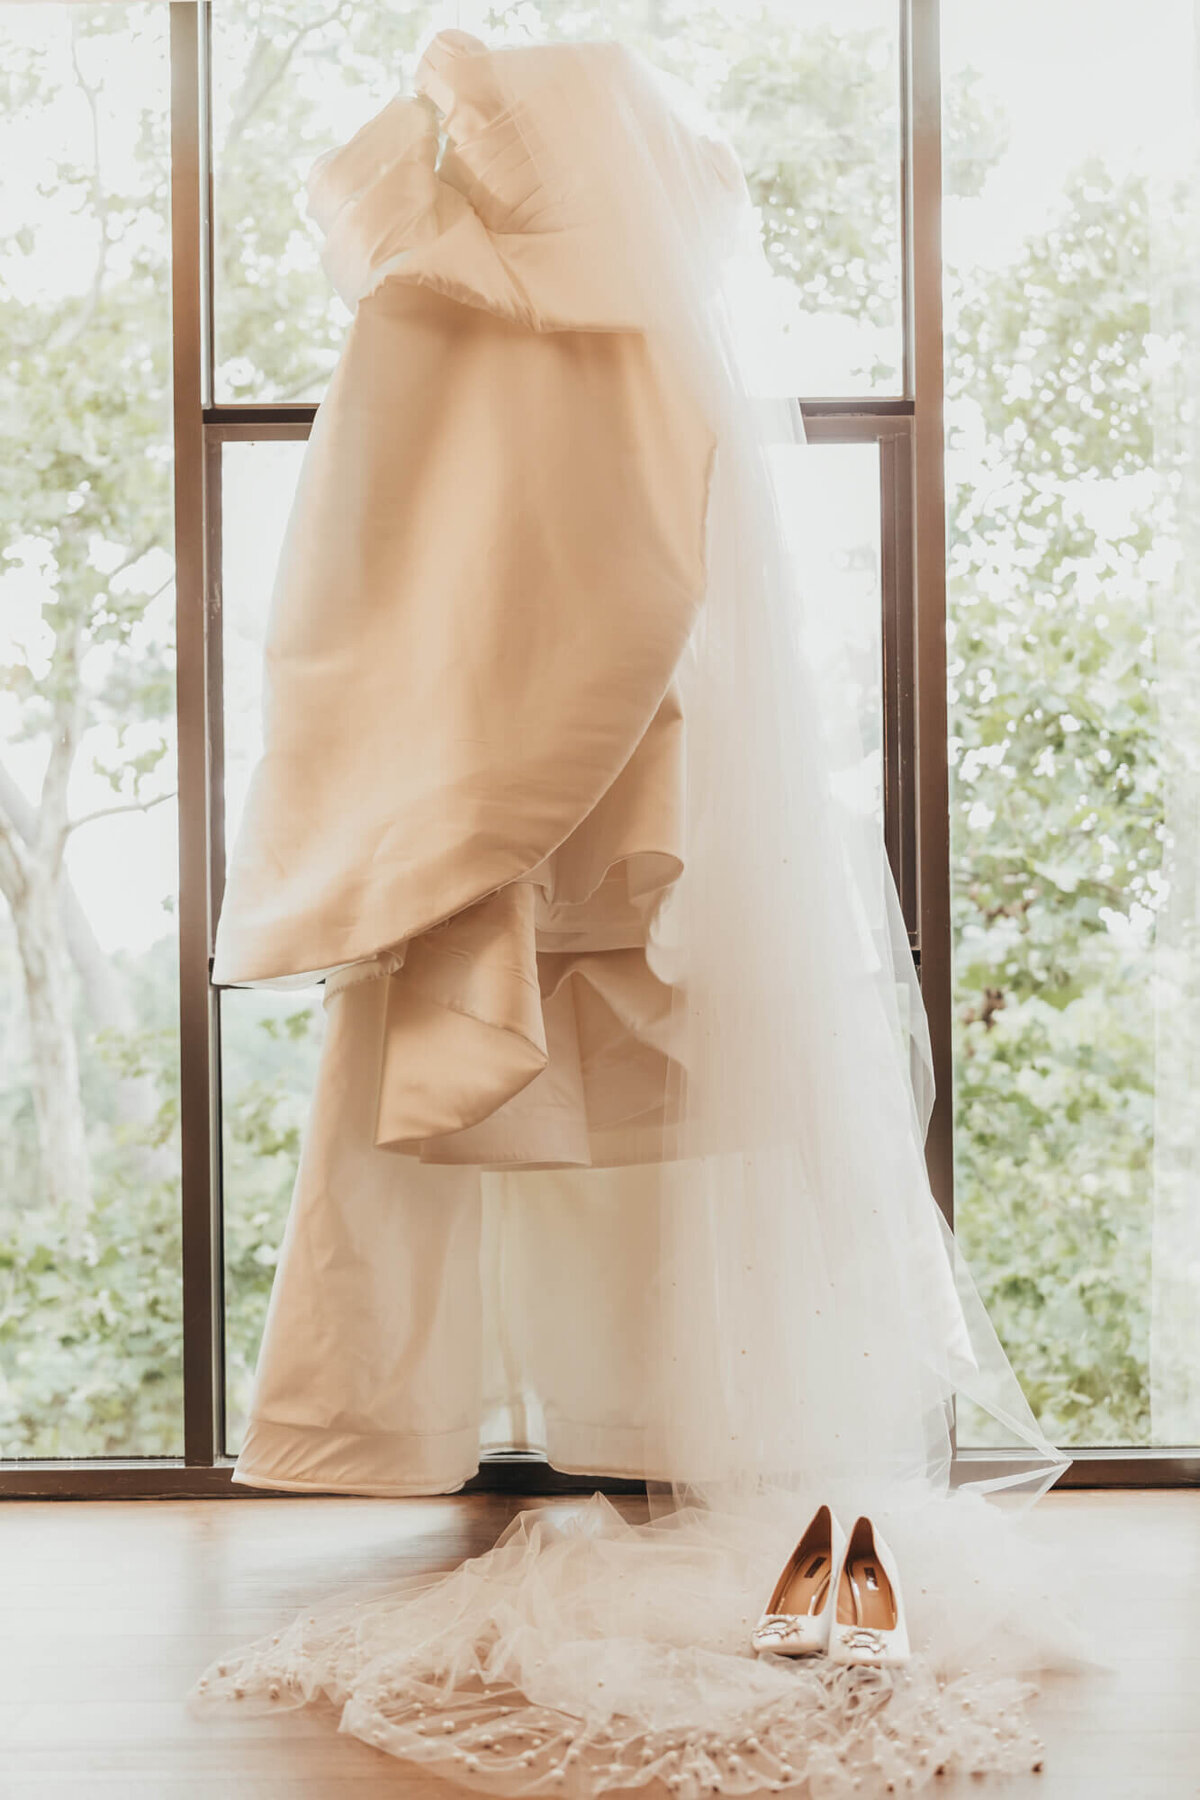 dress image against a wall of windows looking into trees at the Houstonian